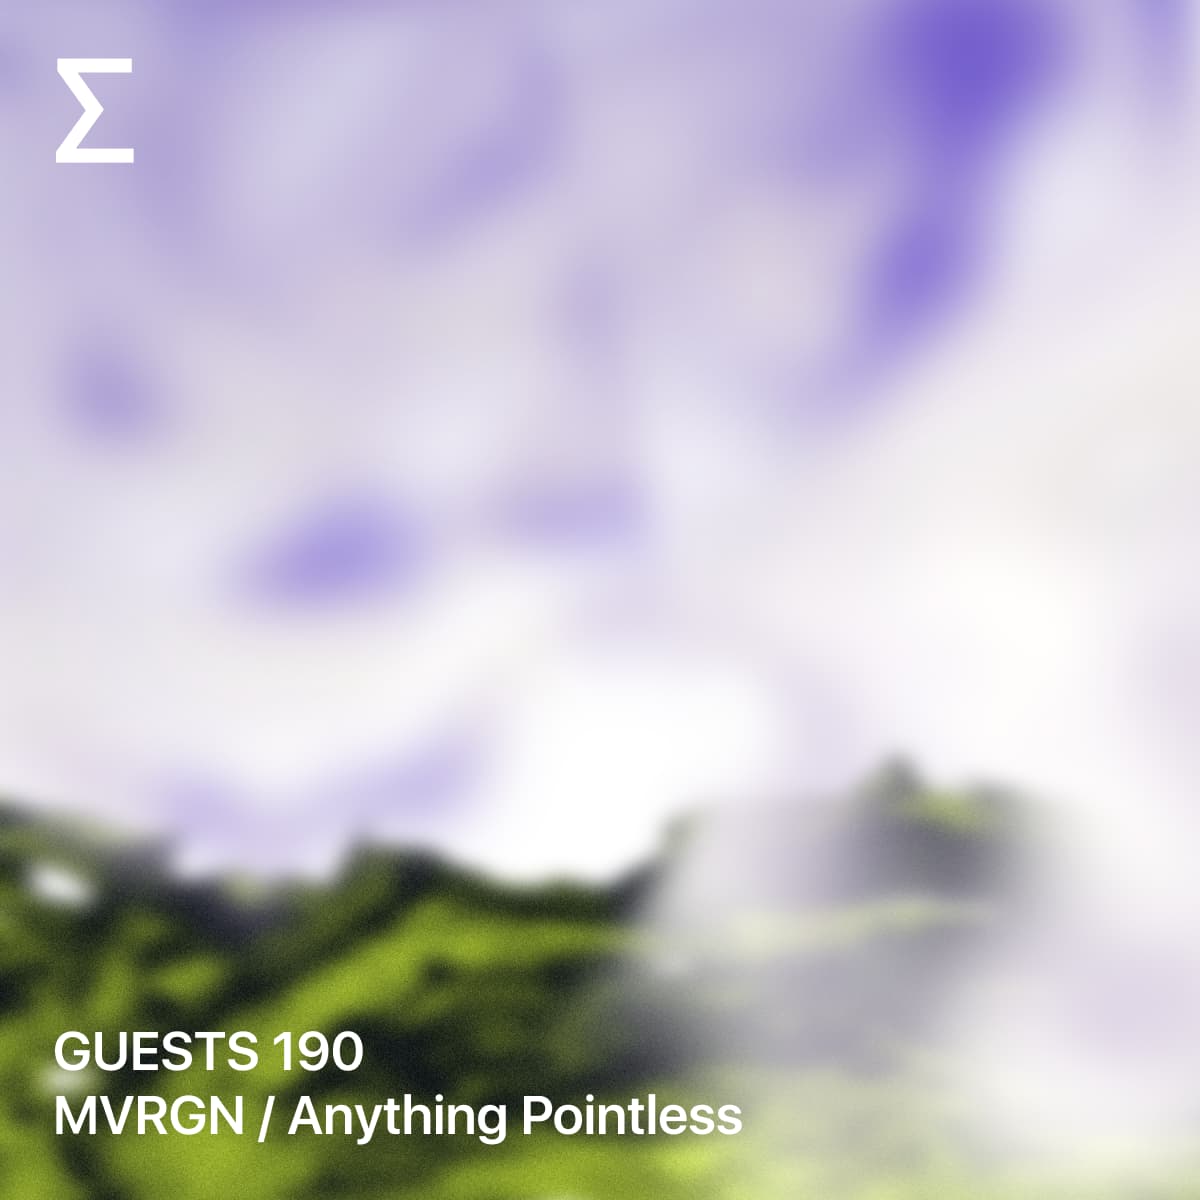 GUESTS 190 – MVRGN / Anything Pointless